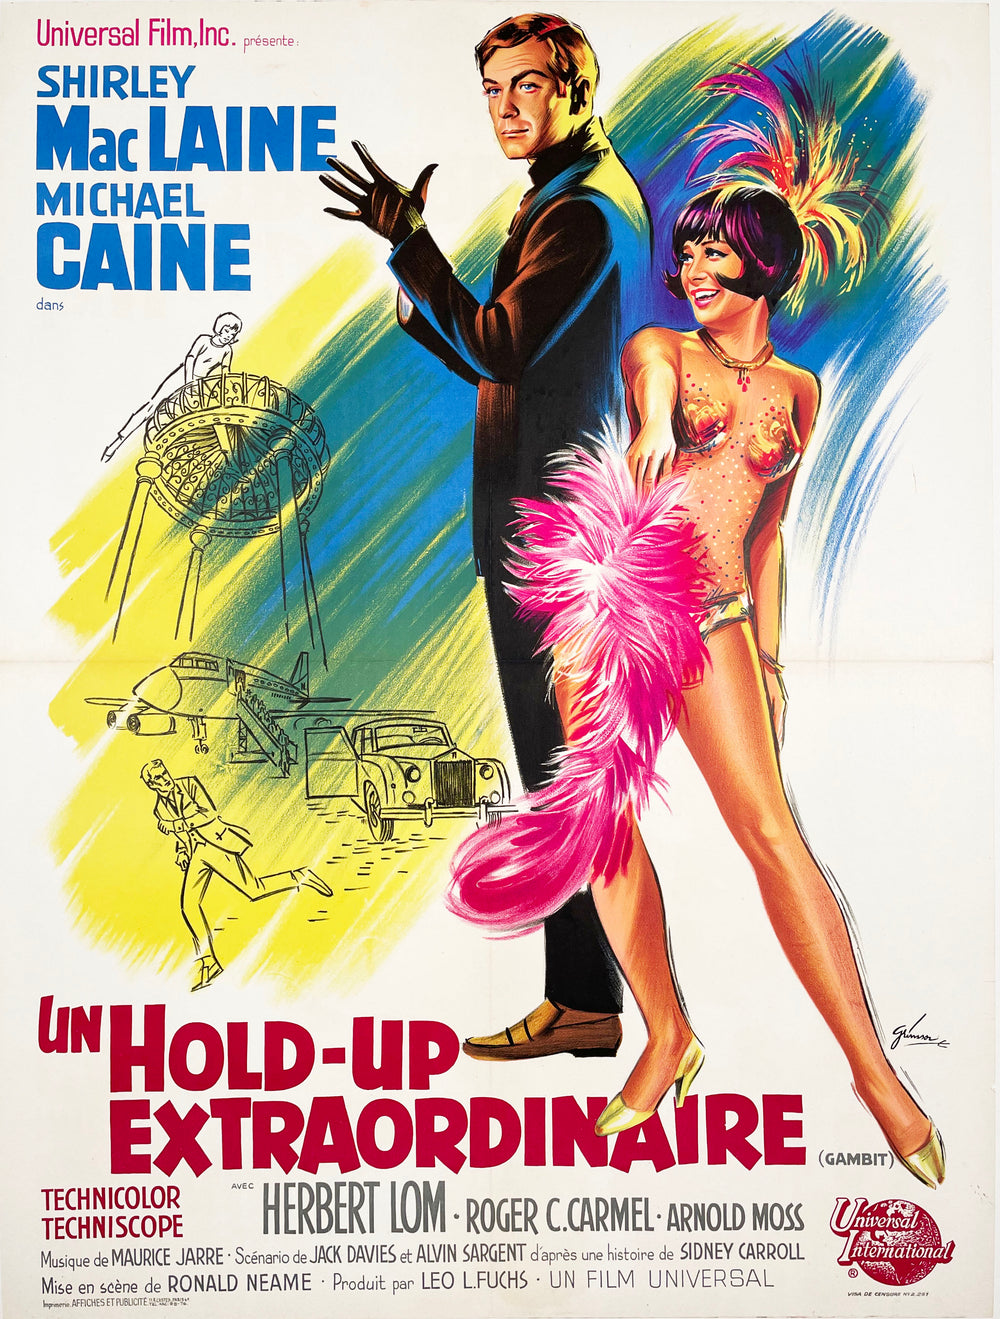 Hold-Up Extraordinaire - Vintage French Film Poster - 1966